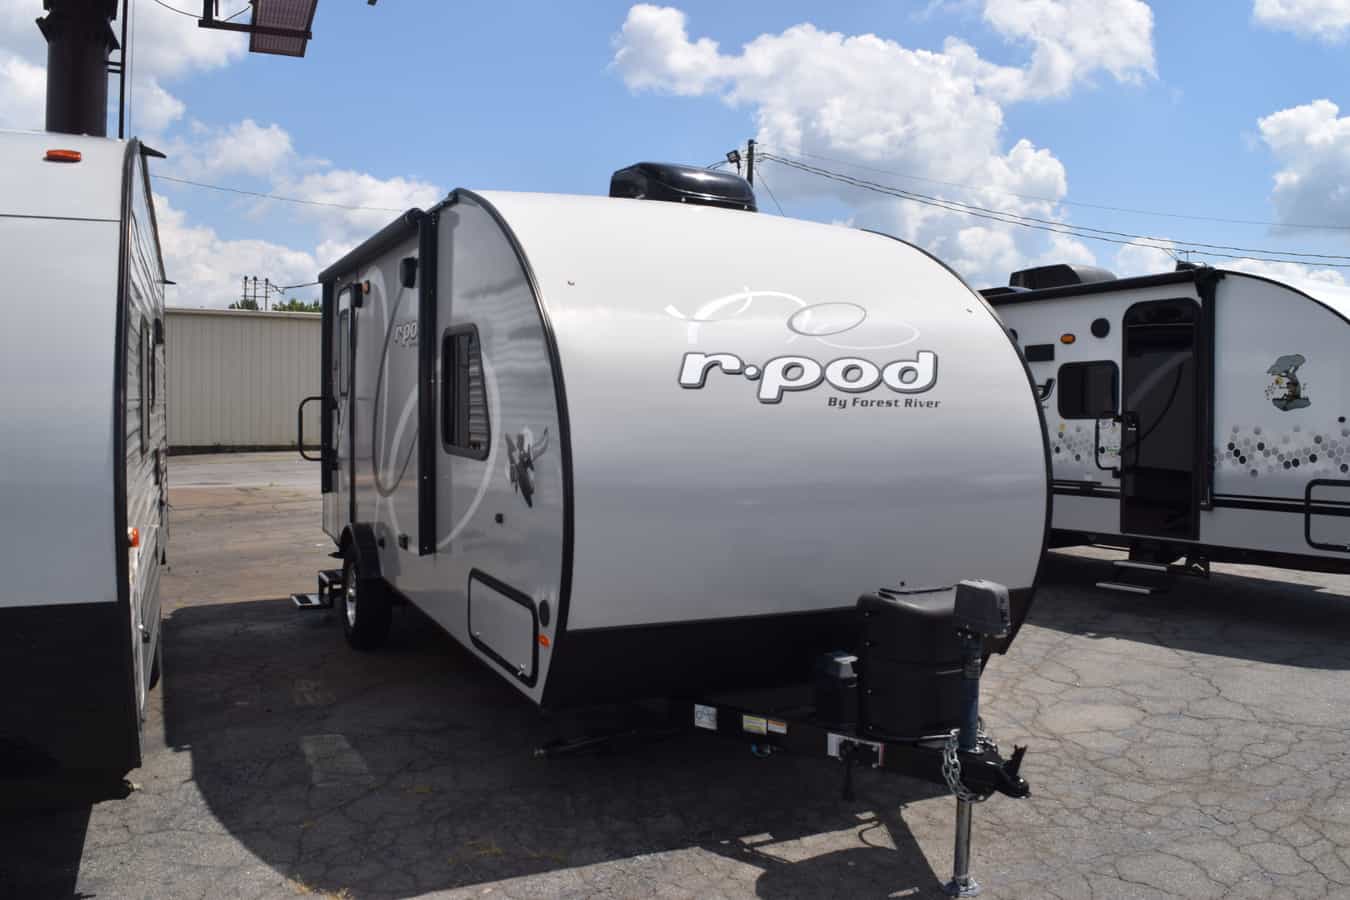 USED 2020 Forest River RPOD RP195